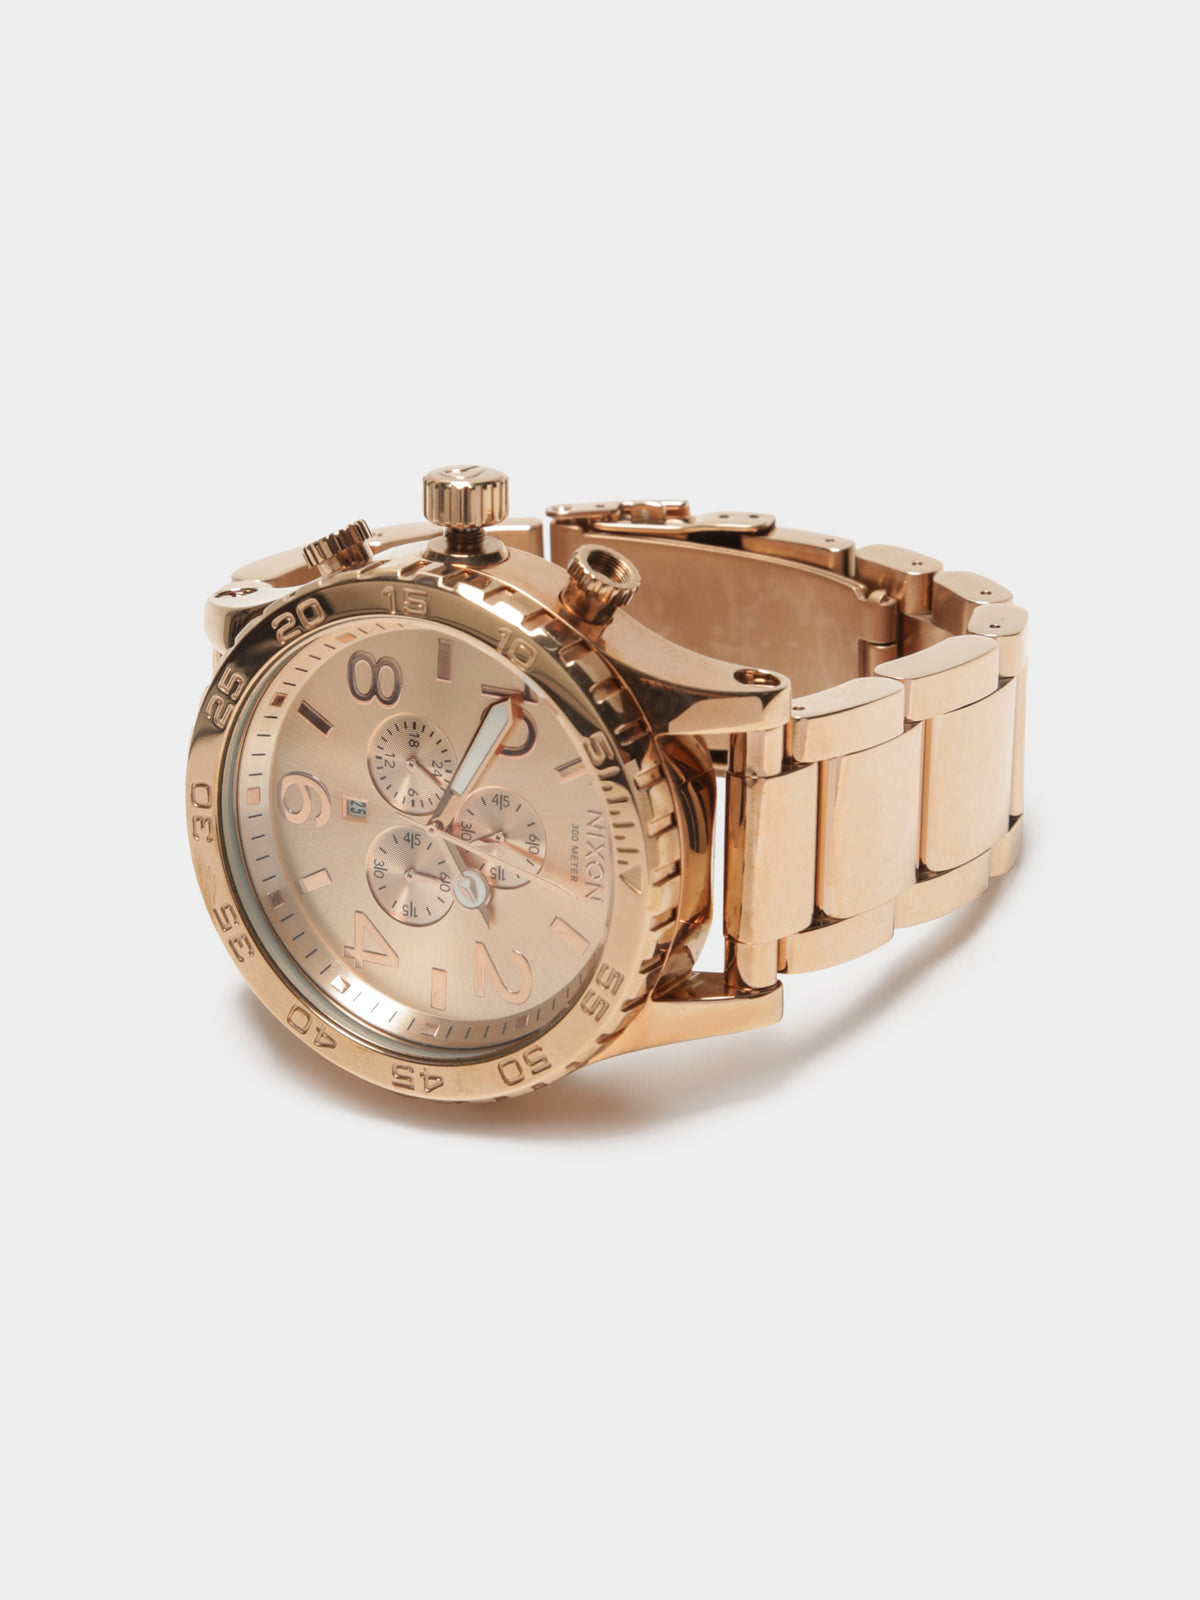 51-30 Chrono 51mm Oversized Chronograph Watch in Rose Gold